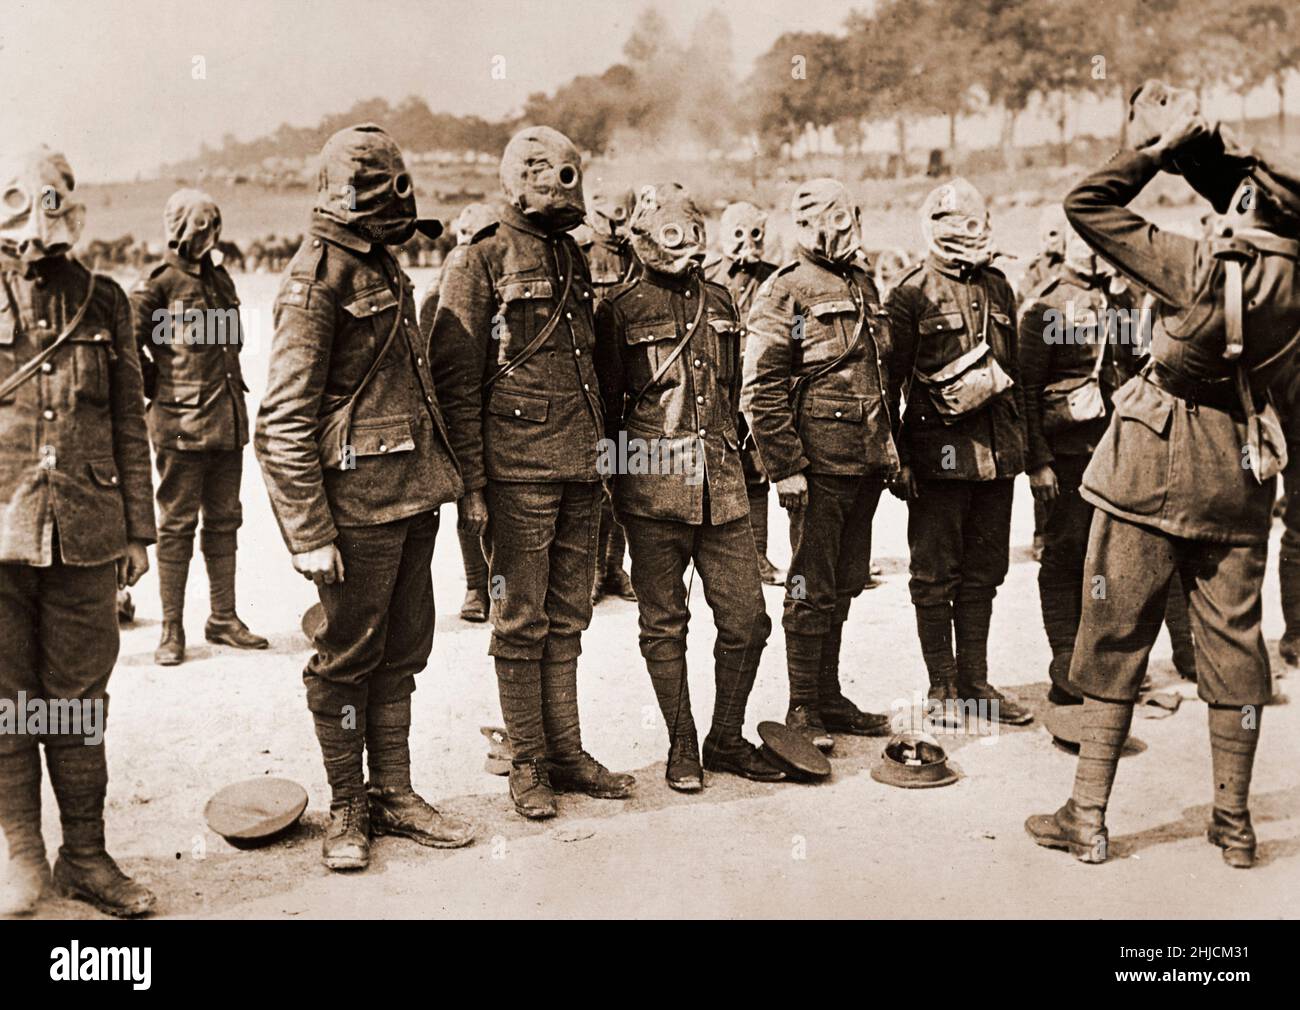 British soldiers being trained on how to use gas masks, WWI, circa 1917-18. Stock Photo